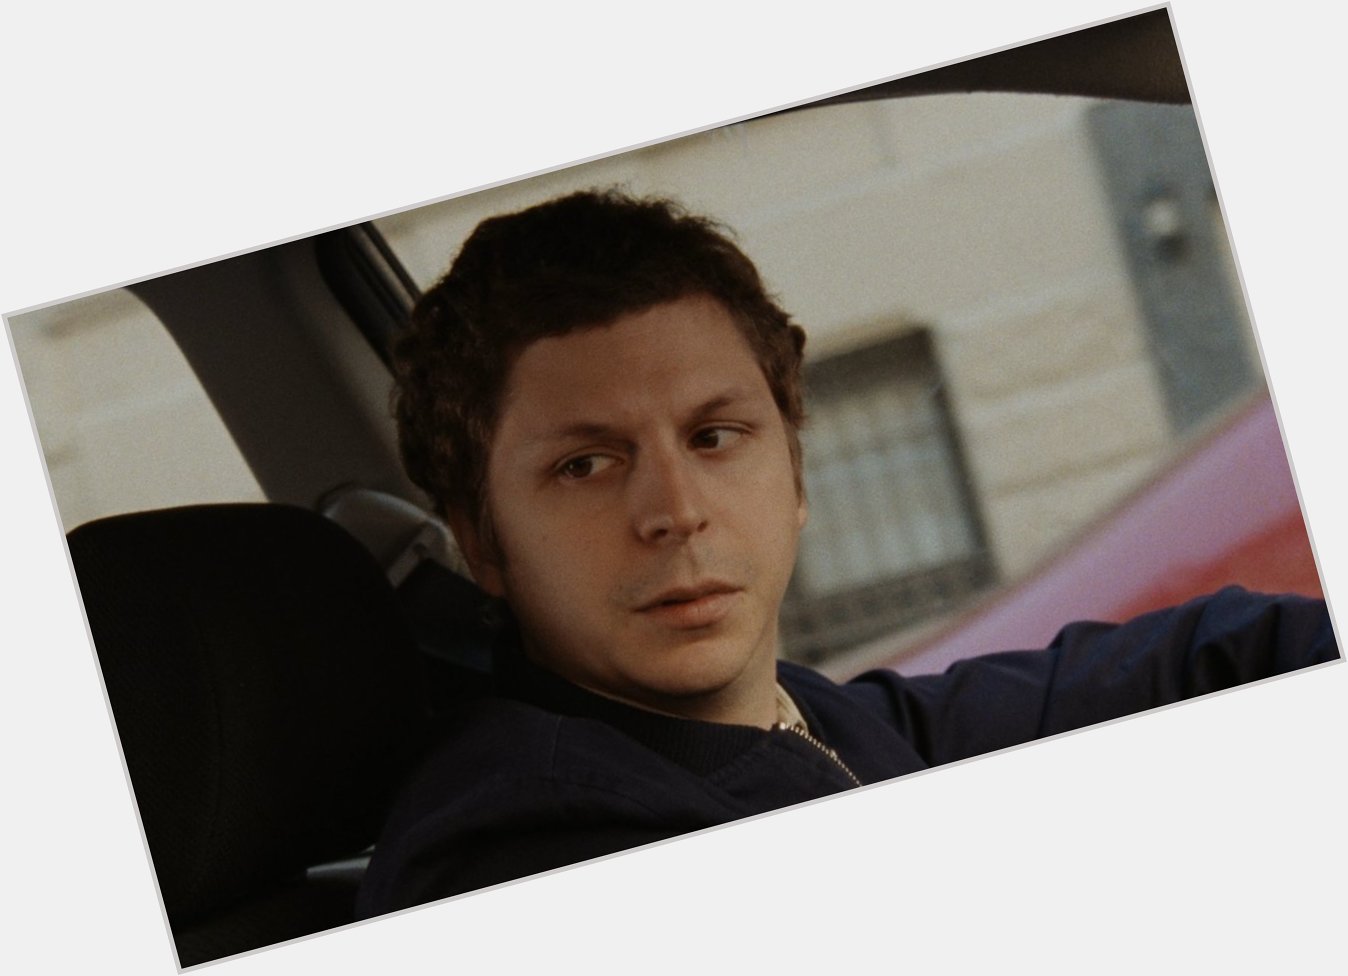 Michael Cera before and after the treatment. Happy birthday! 